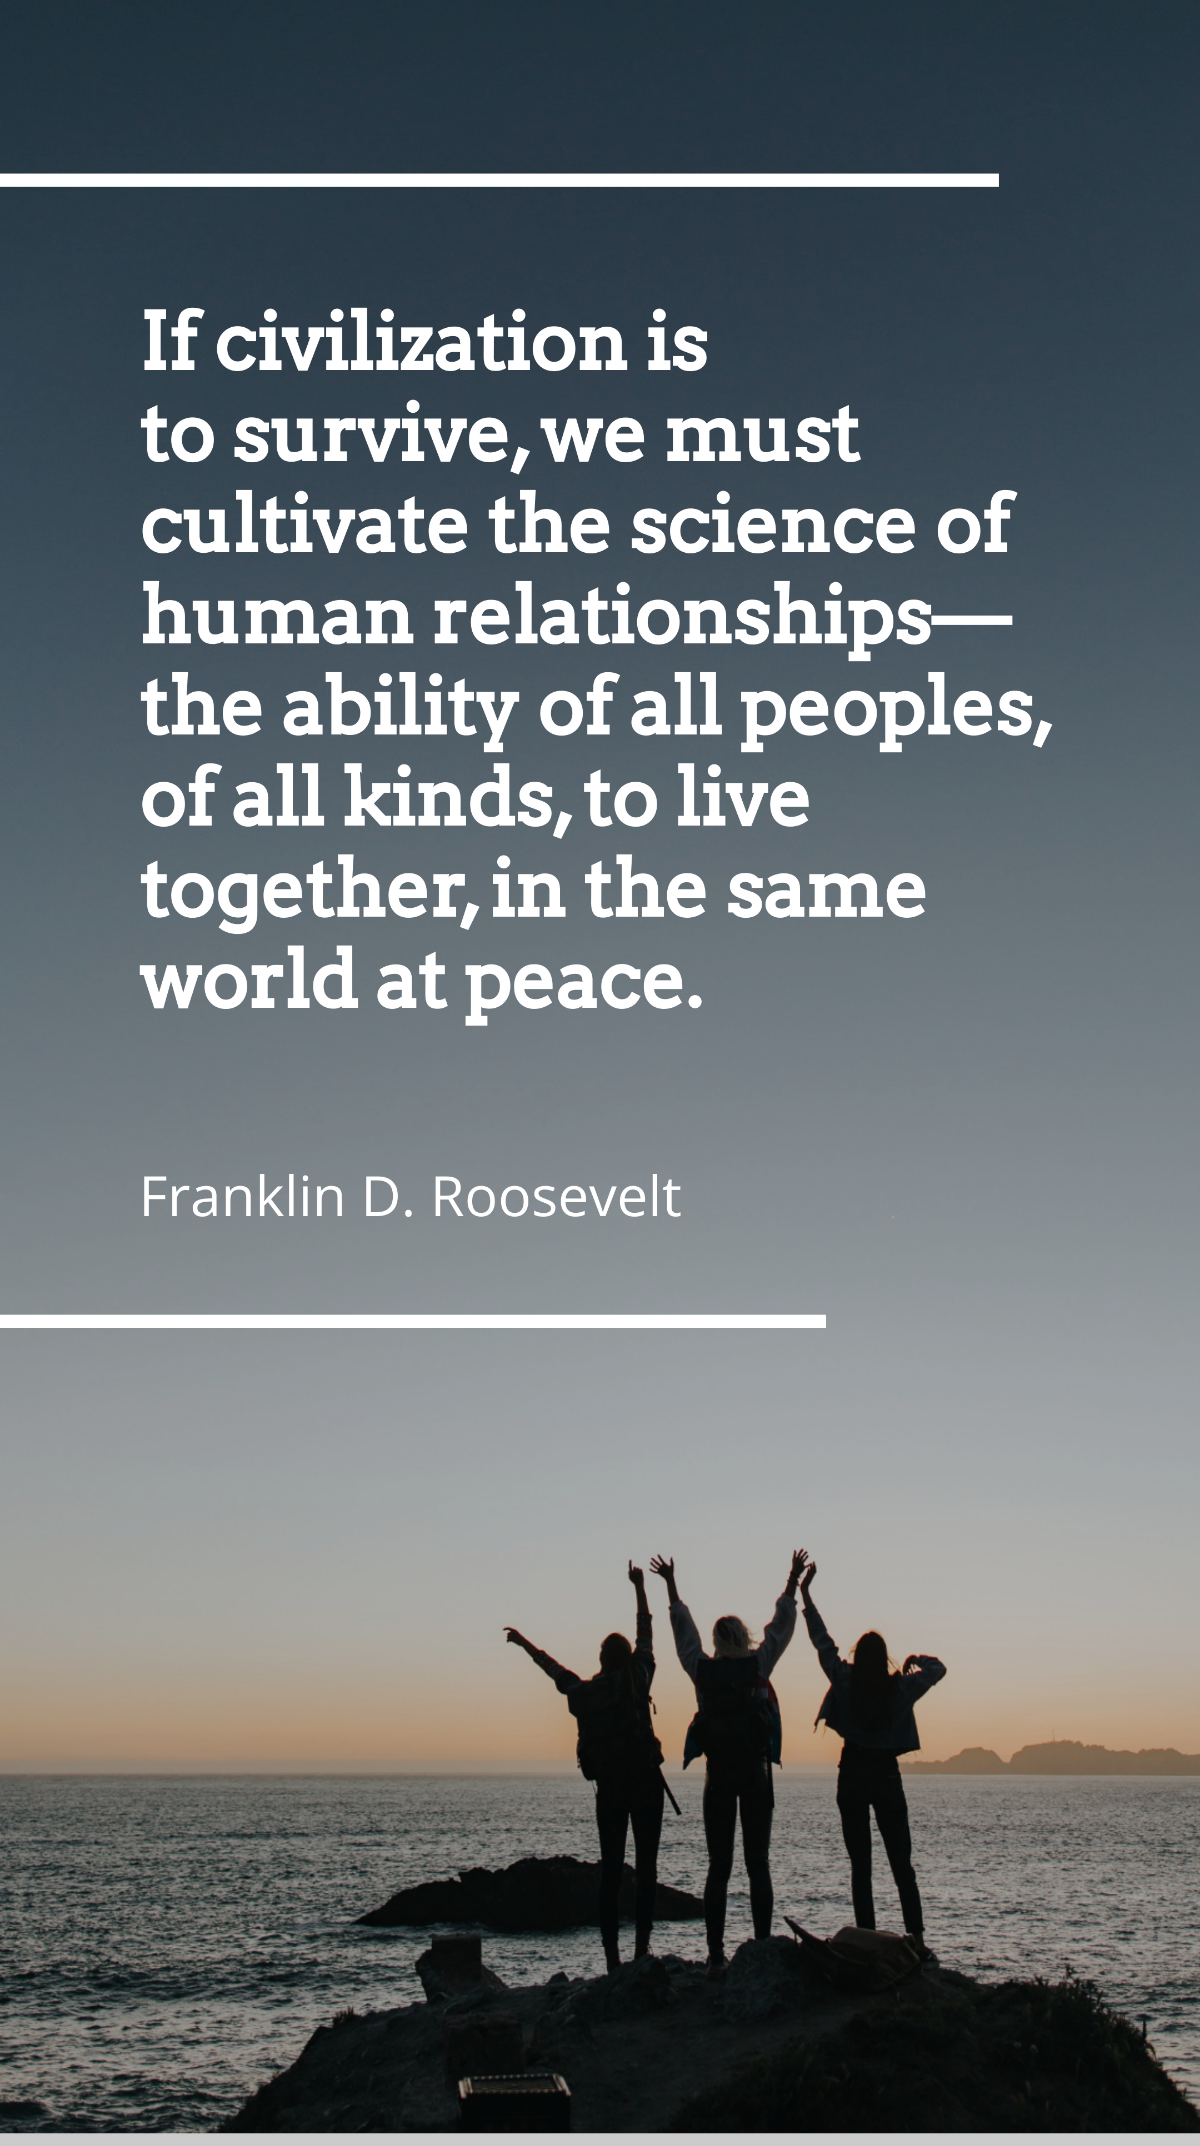 Franklin D. Roosevelt - If civilization is to survive, we must cultivate the science of human relationships - the ability of all peoples, of all kinds, to live together, in the same world at peace. Te